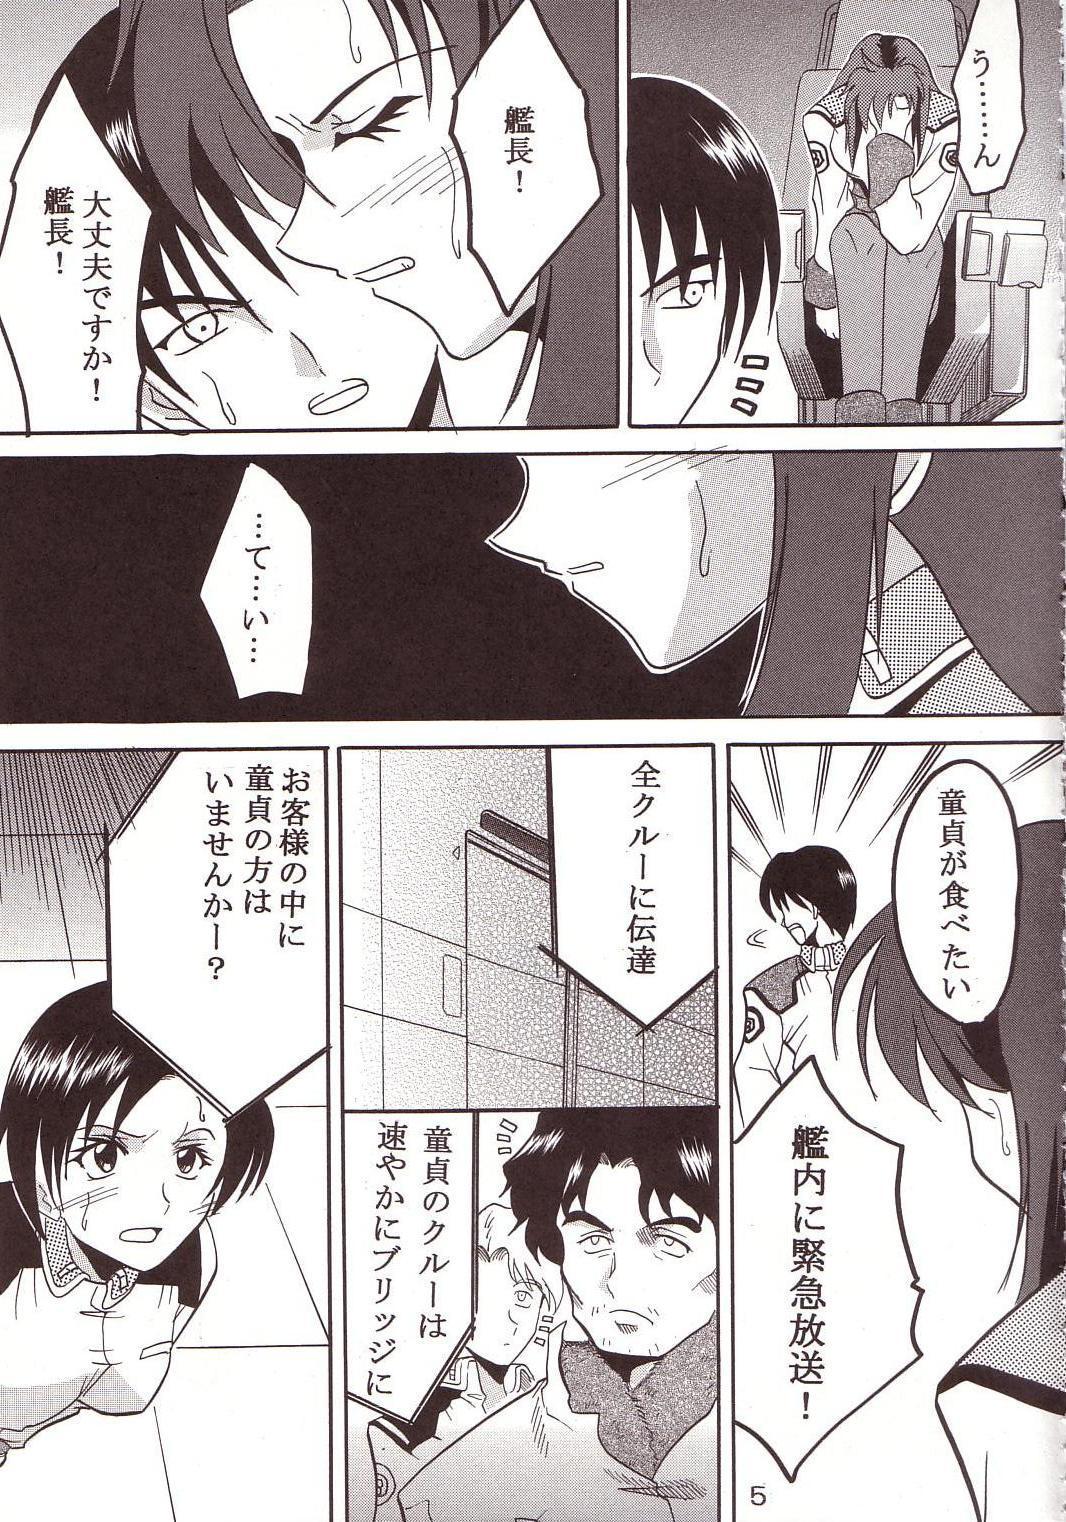 Sesso SEED 3 - Gundam seed Sola - Page 6